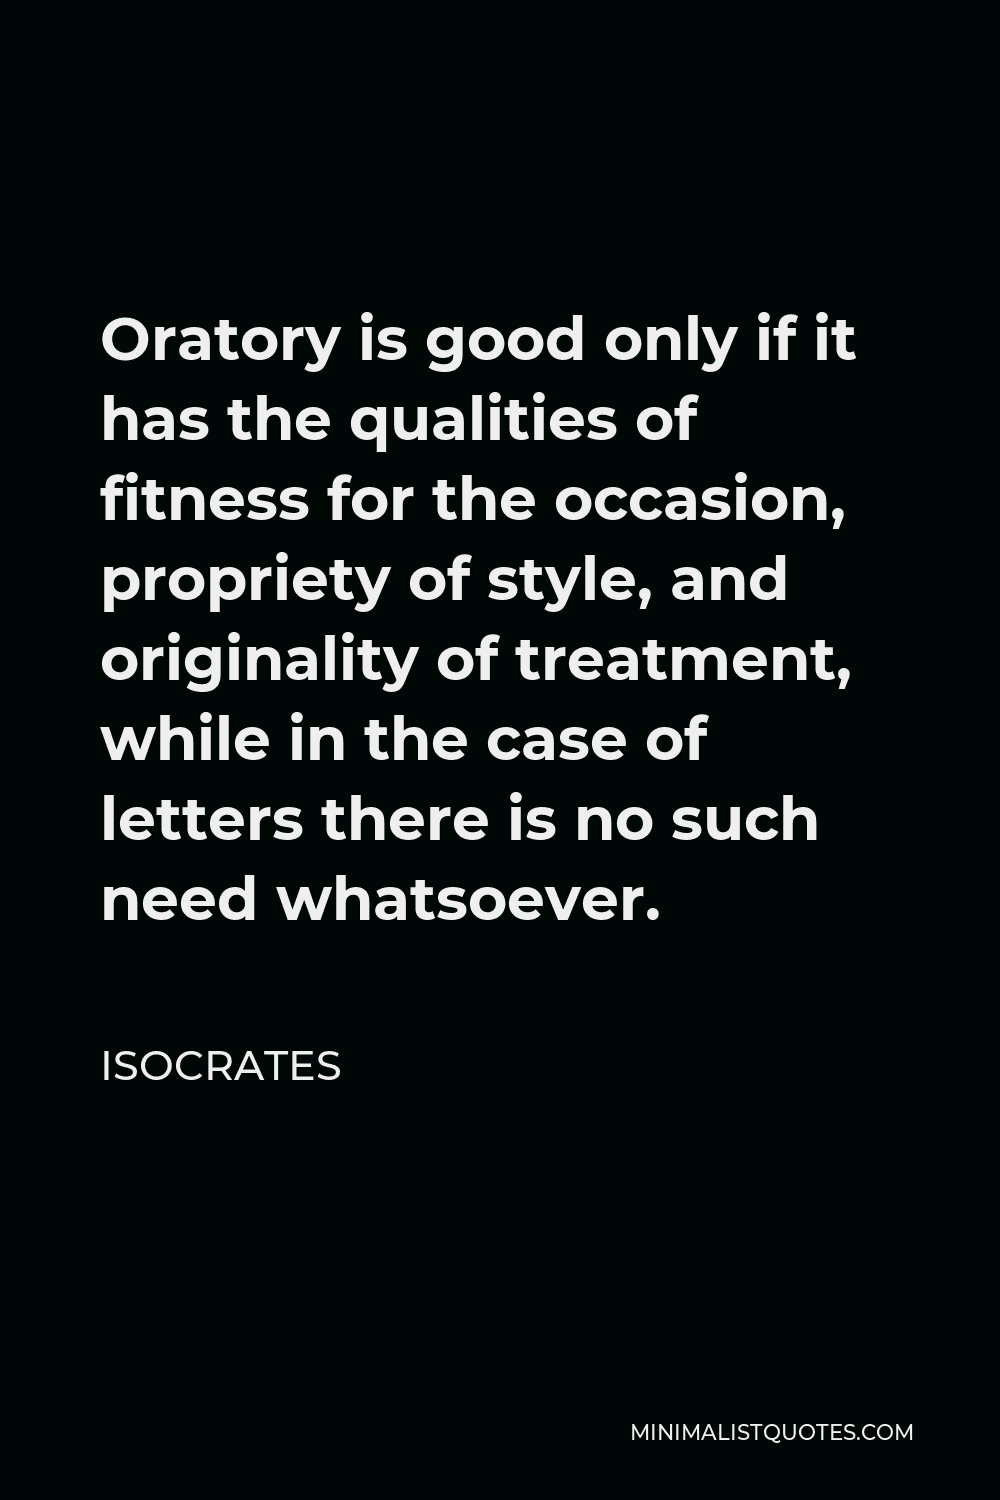 Isocrates Quote - Oratory is good only if it has the qualities of fitness for the occasion, propriety of style, and originality of treatment, while in the case of letters there is no such need whatsoever.